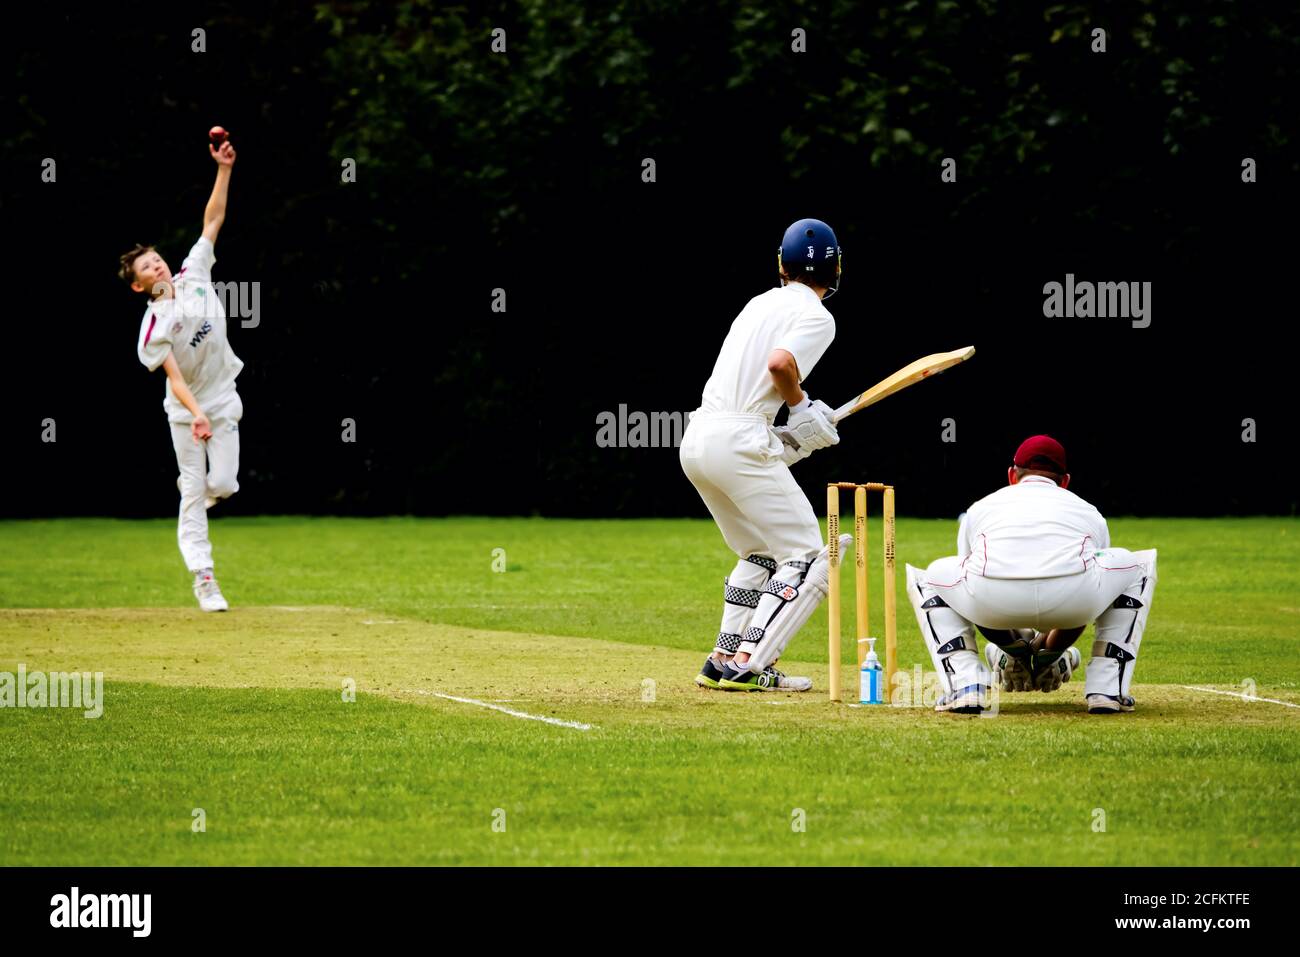 Bowling to a batsman in a village cricket match Stock Photo